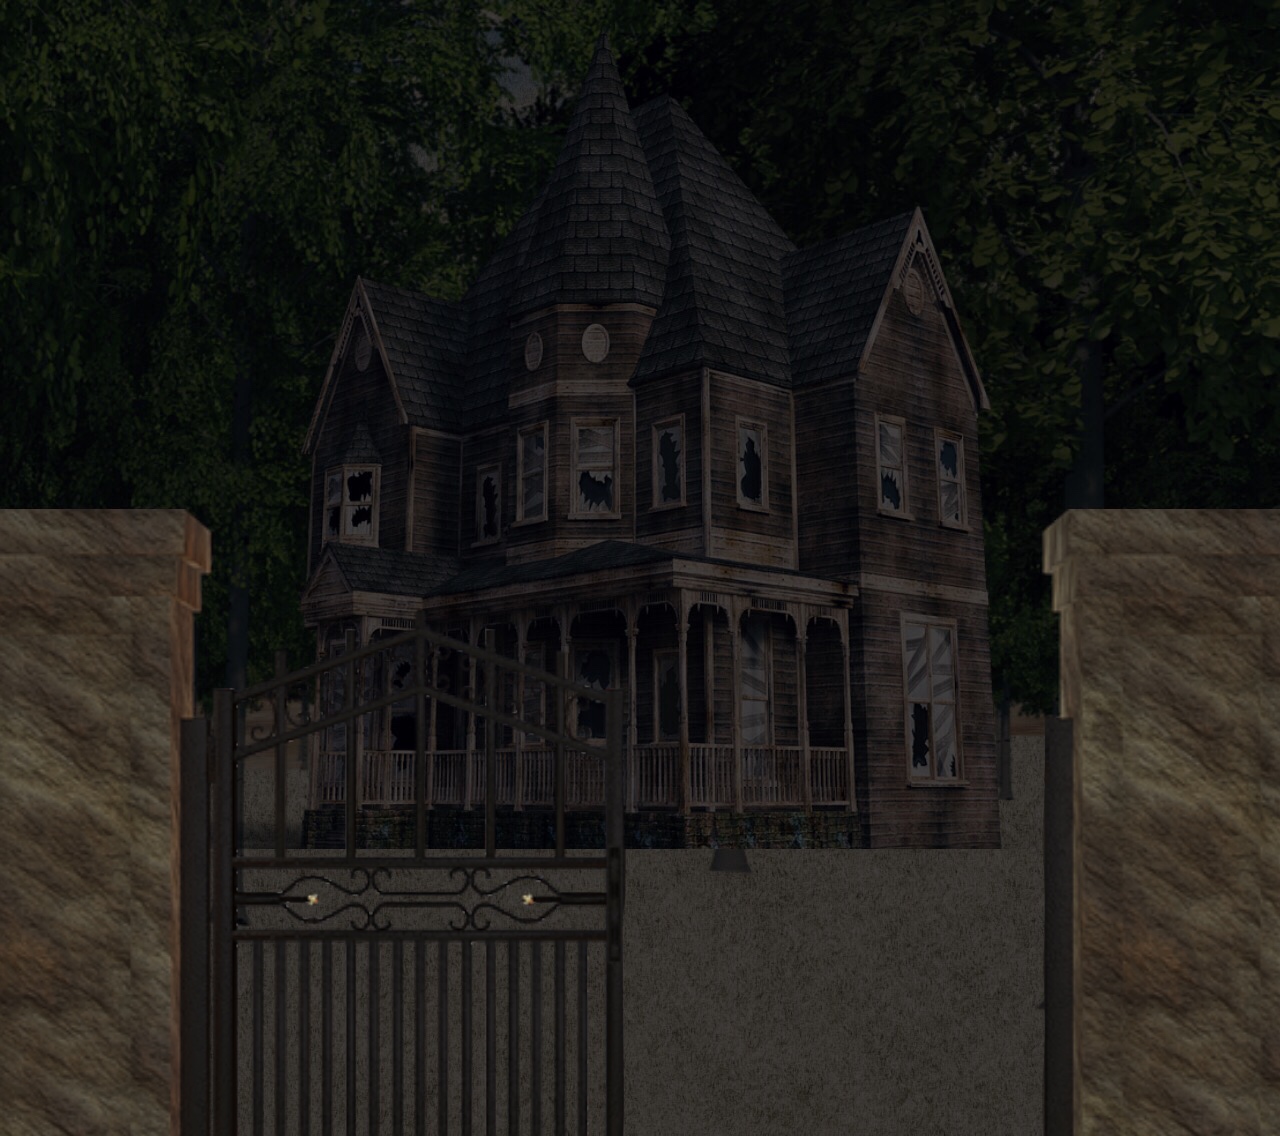 EXT. HAUNTED HOUSE – NIGHT